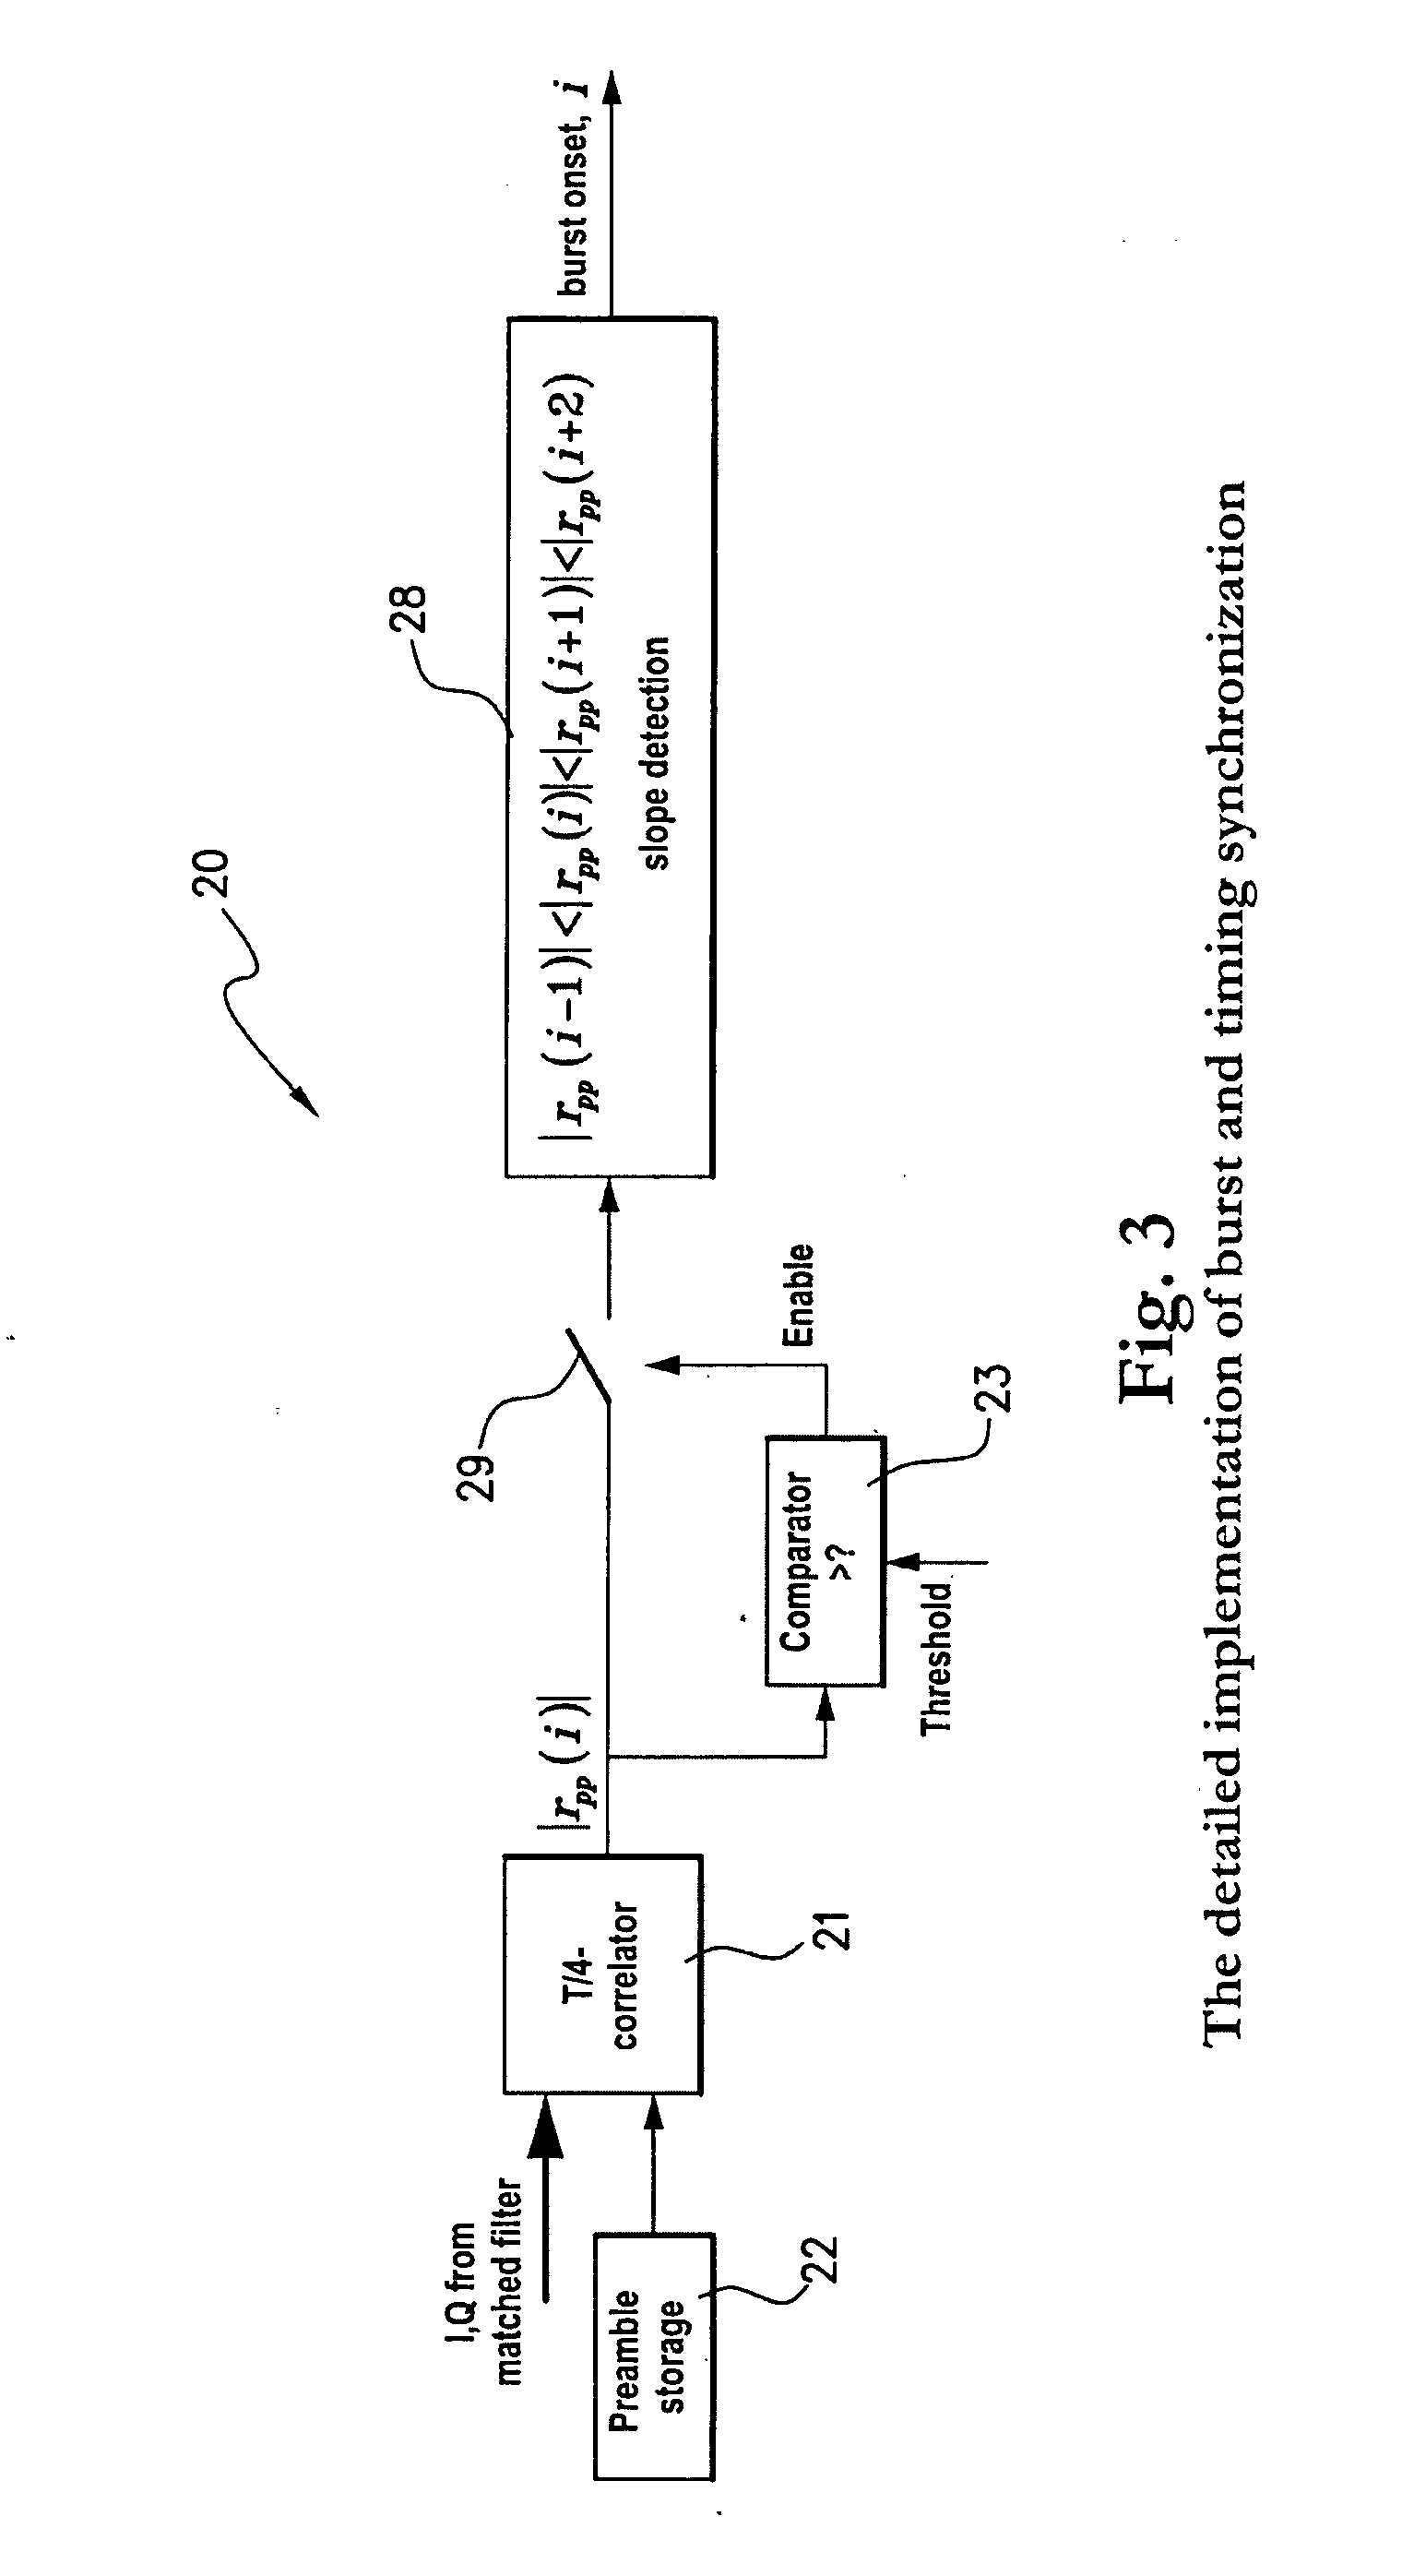 Apparatus for burst and timing synchronization in high-rate indoor wireless communication